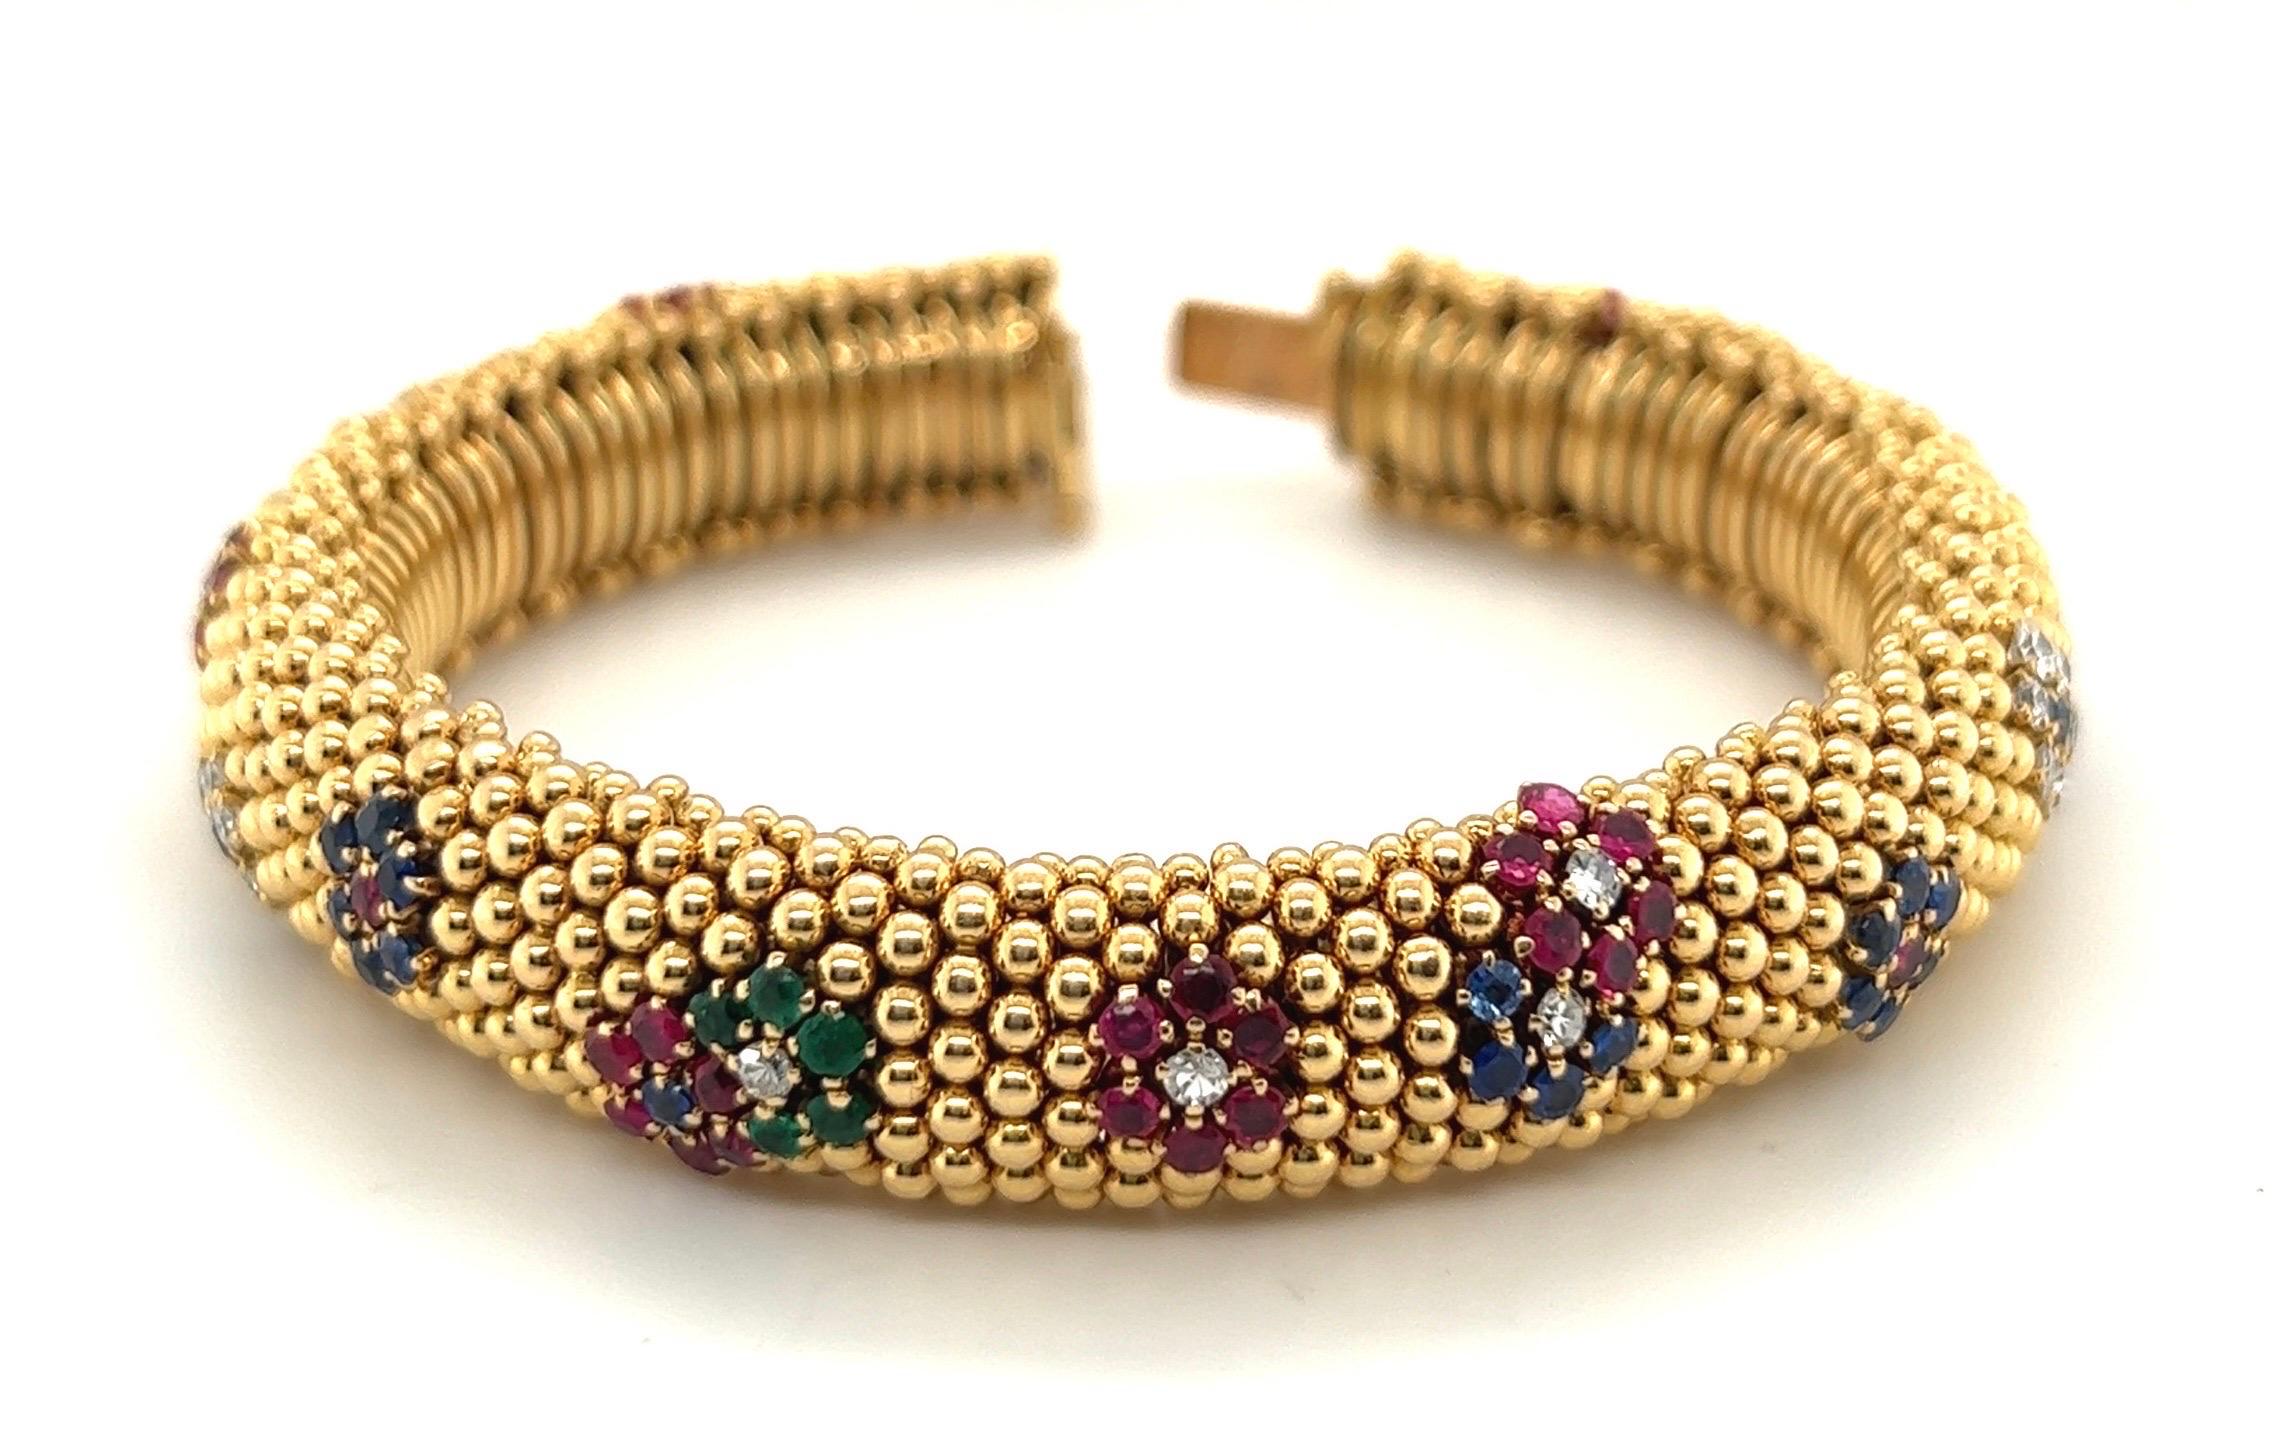 Gorgeous Van Cleef & Arpels 18 karat yellow gold, diamond, sapphire and emerald Bagatelle bracelet, circa 1960.
Designed as a highly flexible bombé bracelet composed of a beaded ground decorated with applied ruby, sapphire, emerald and diamond